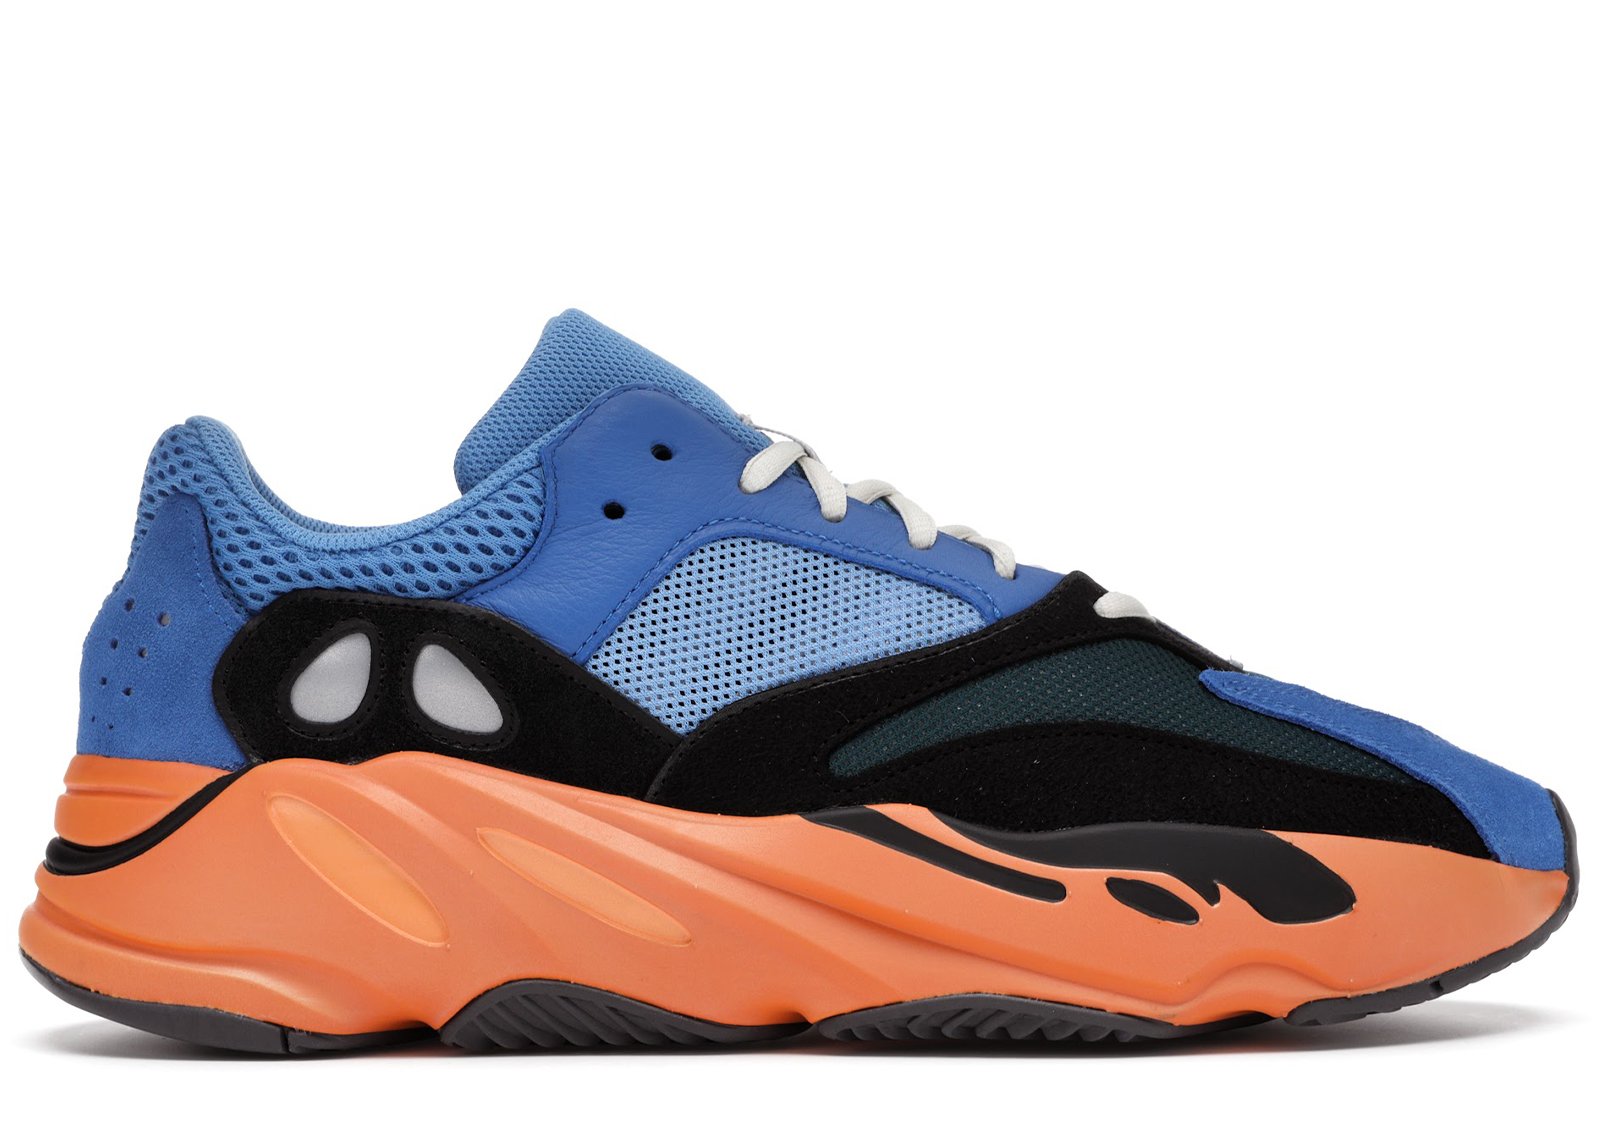 adidas Yeezy Boost 700 Bright Blue sneakers